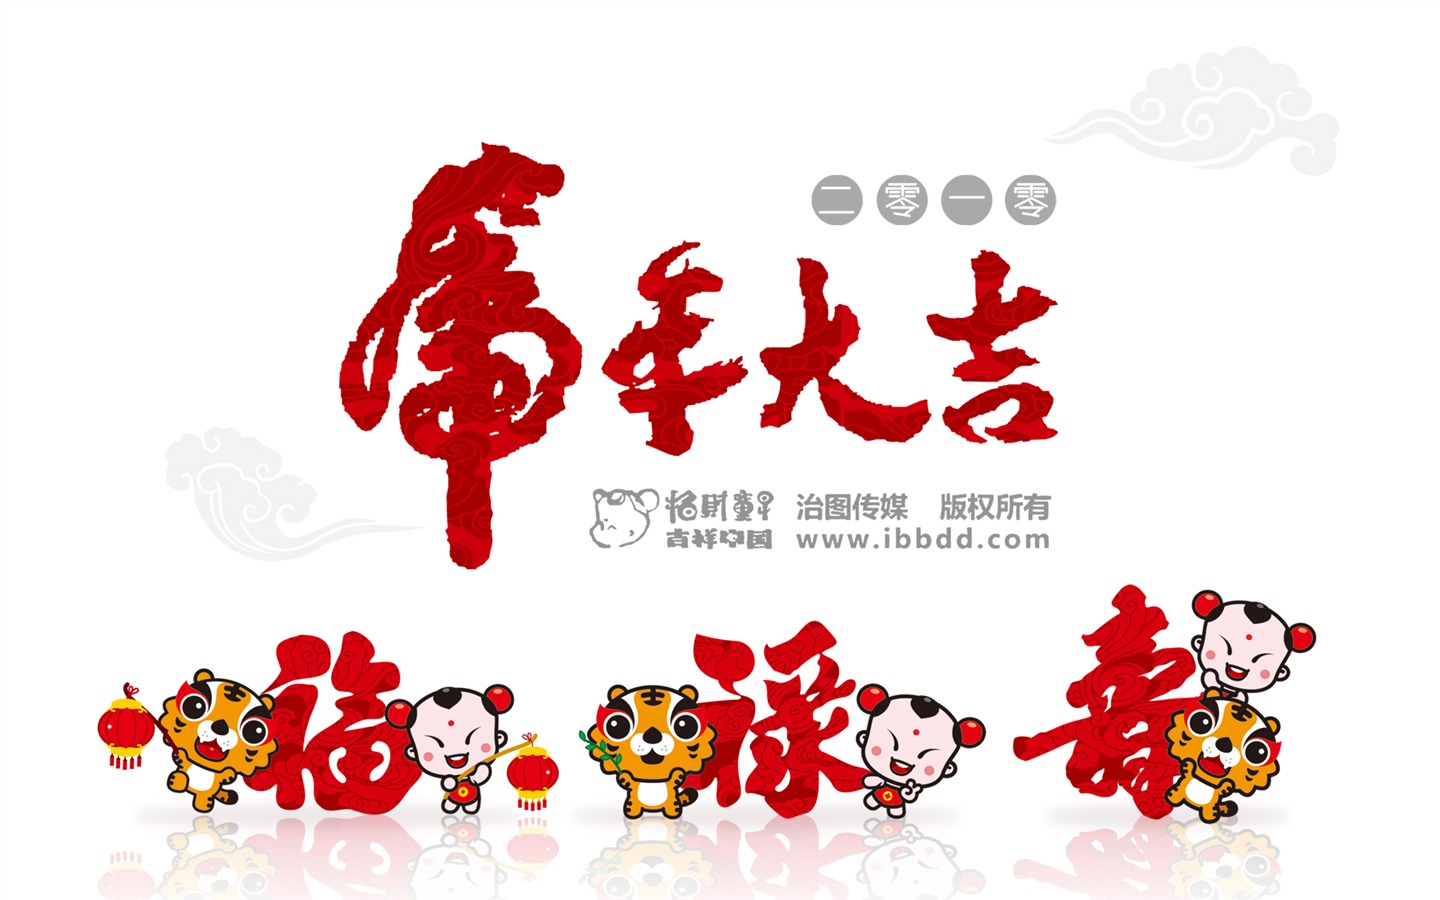 Lucky Boy Year of the Tiger Wallpaper #2 - 1440x900